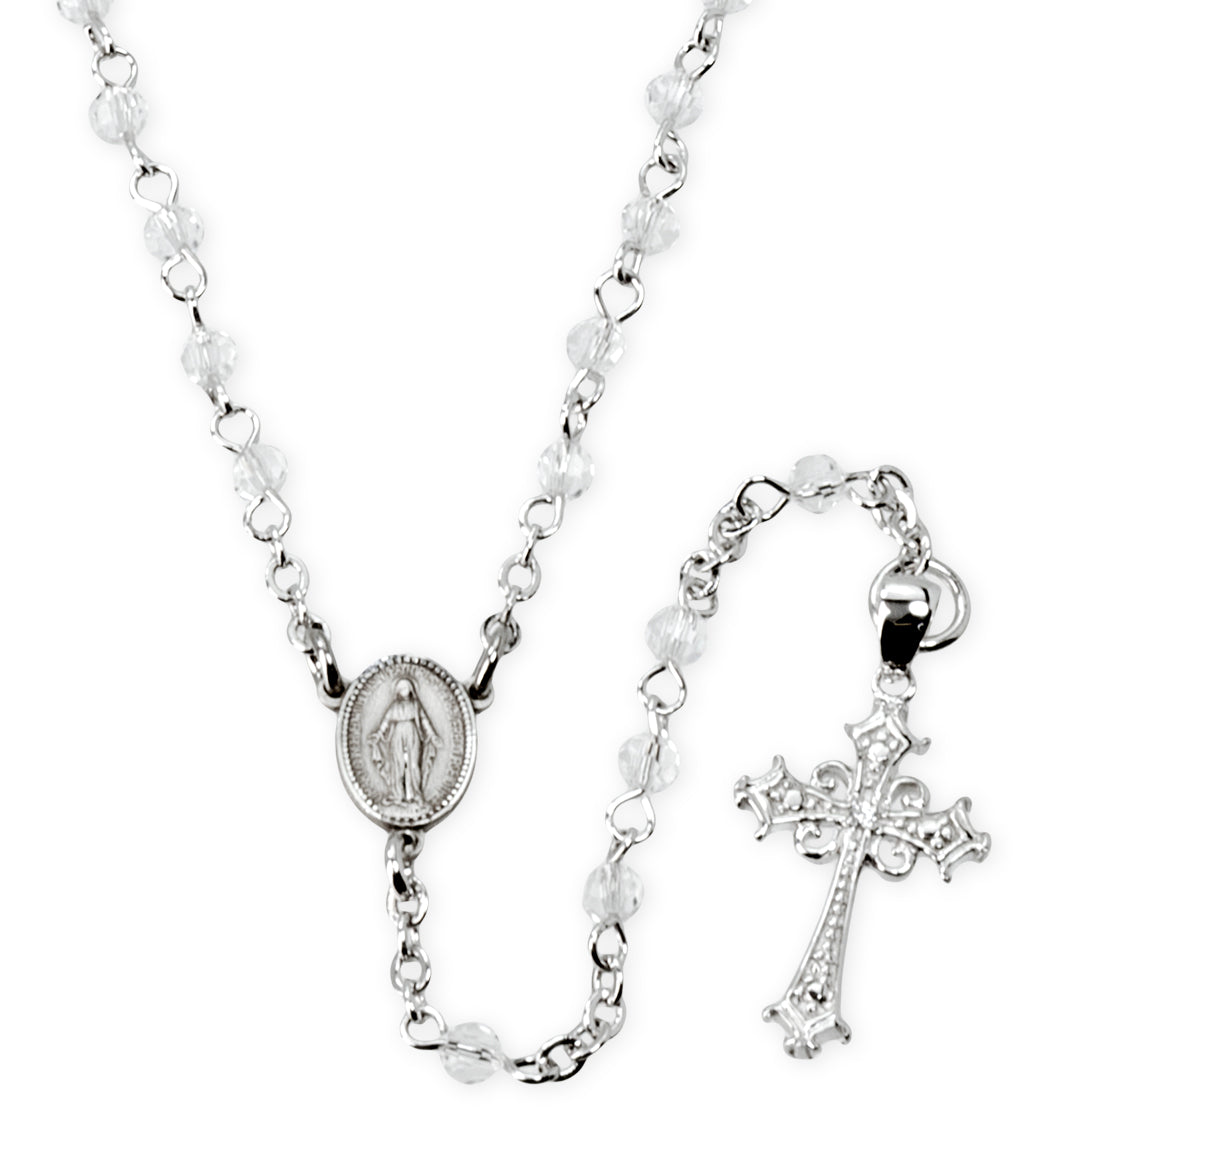 Clear Crystal Bead Sterling Silver Rosary Necklace